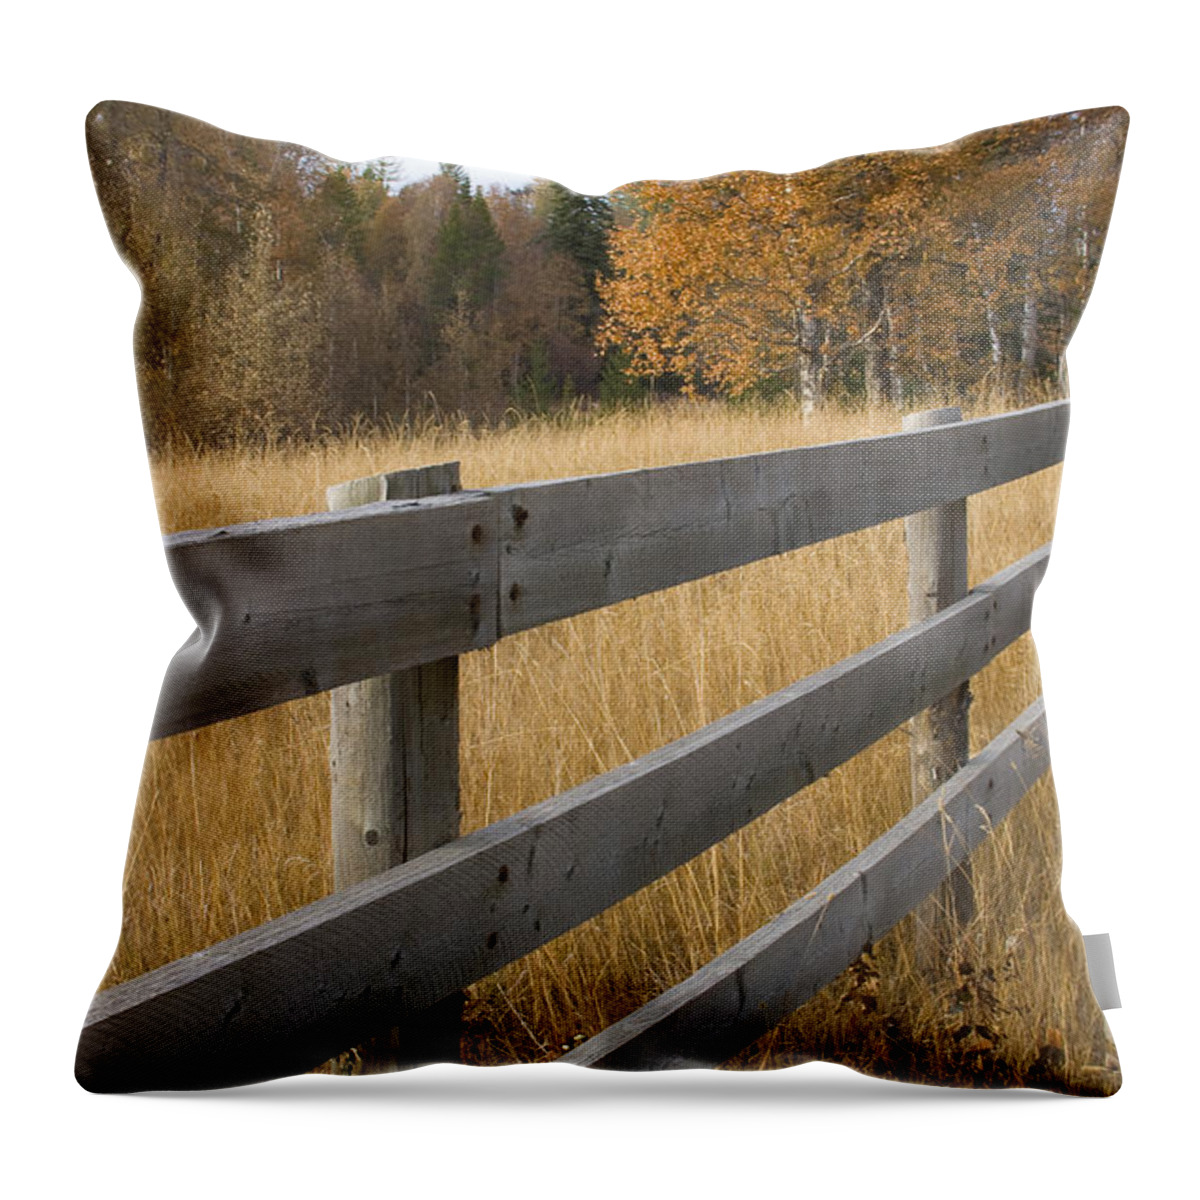 Grass Throw Pillow featuring the photograph Autumn Fence by Idaho Scenic Images Linda Lantzy